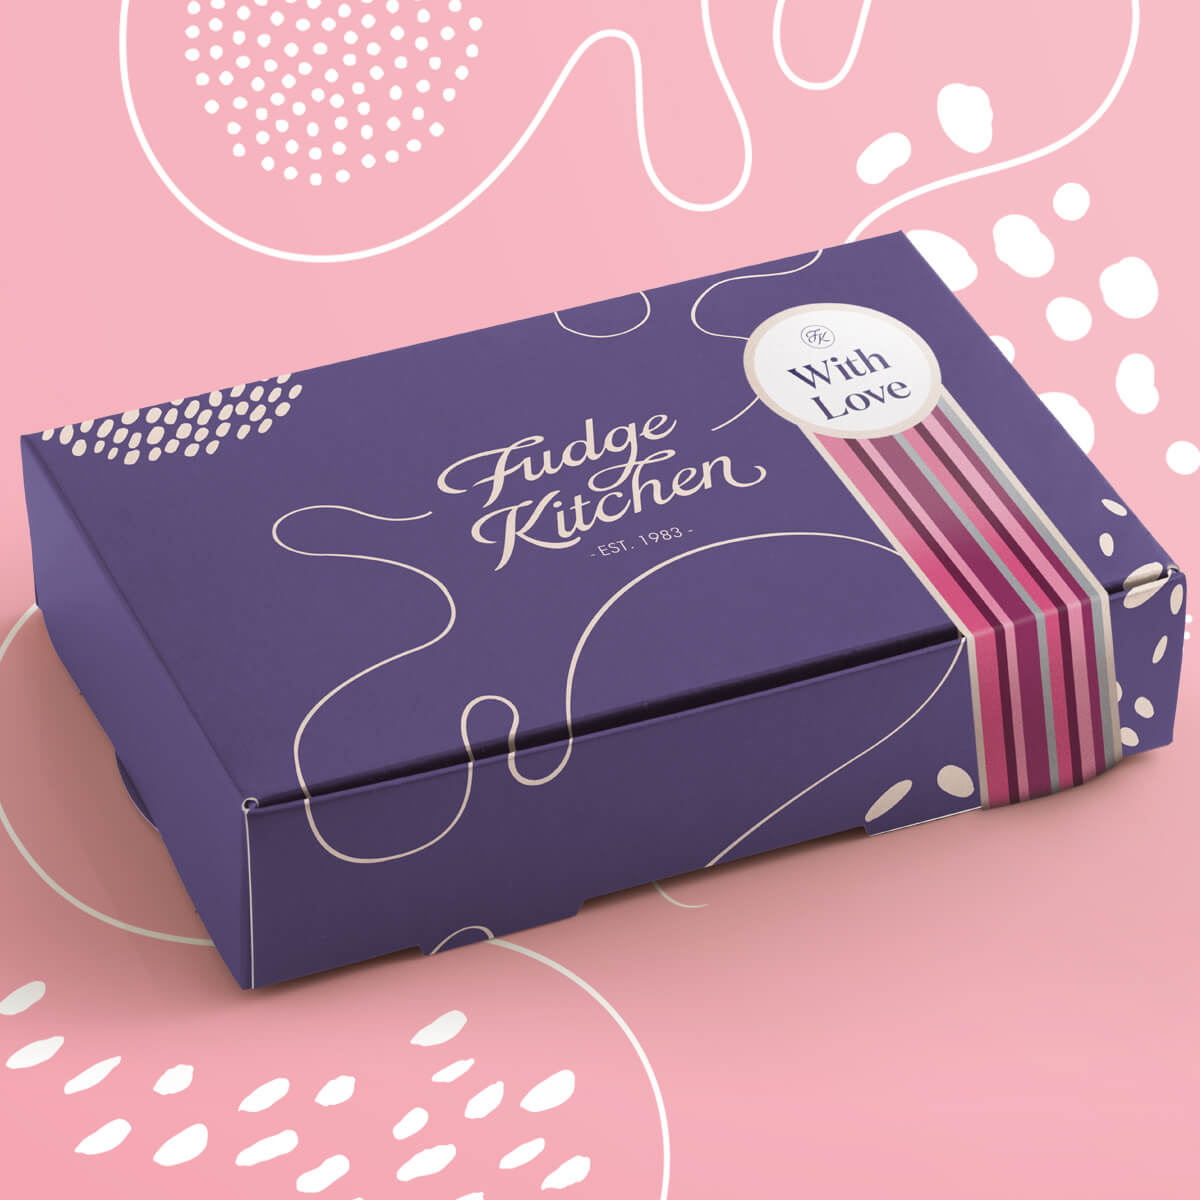 Butter fudge gift box with 'with love' band